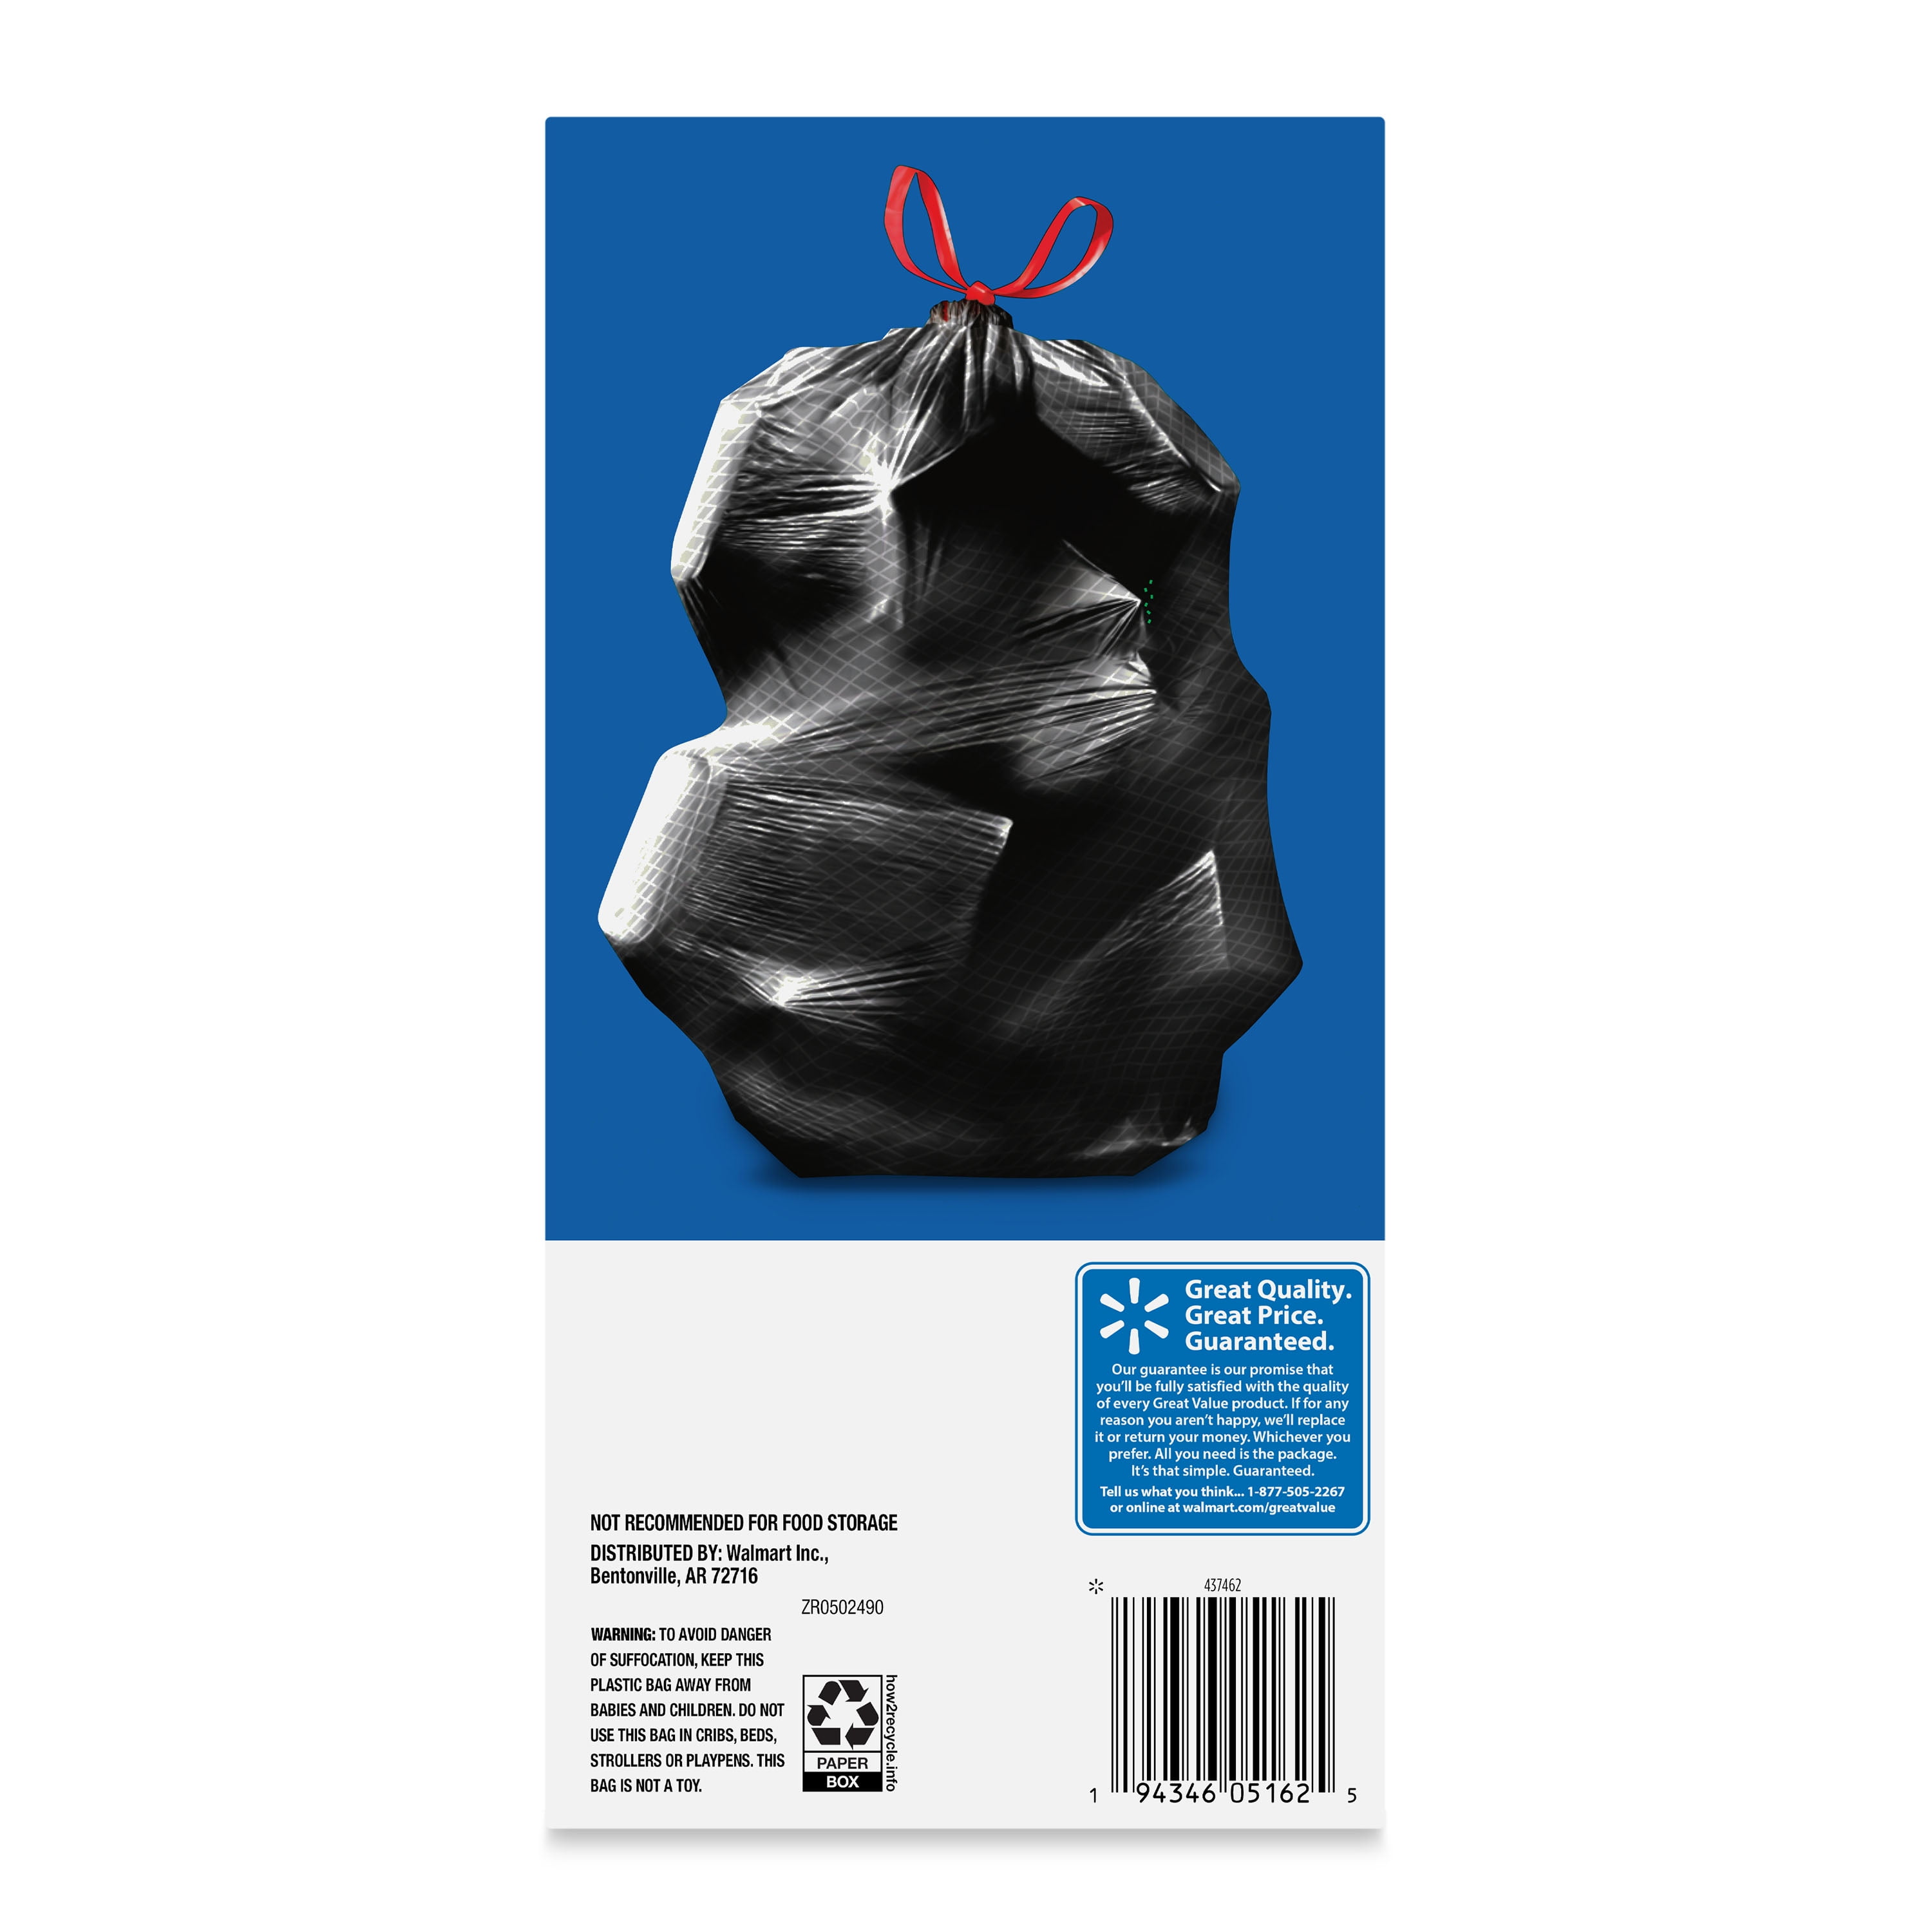 H.S Trash Bags 7ct 33gl + Ties X-Tra Lg-wholesale -  -  Online wholesale store of general merchandise and grocery items